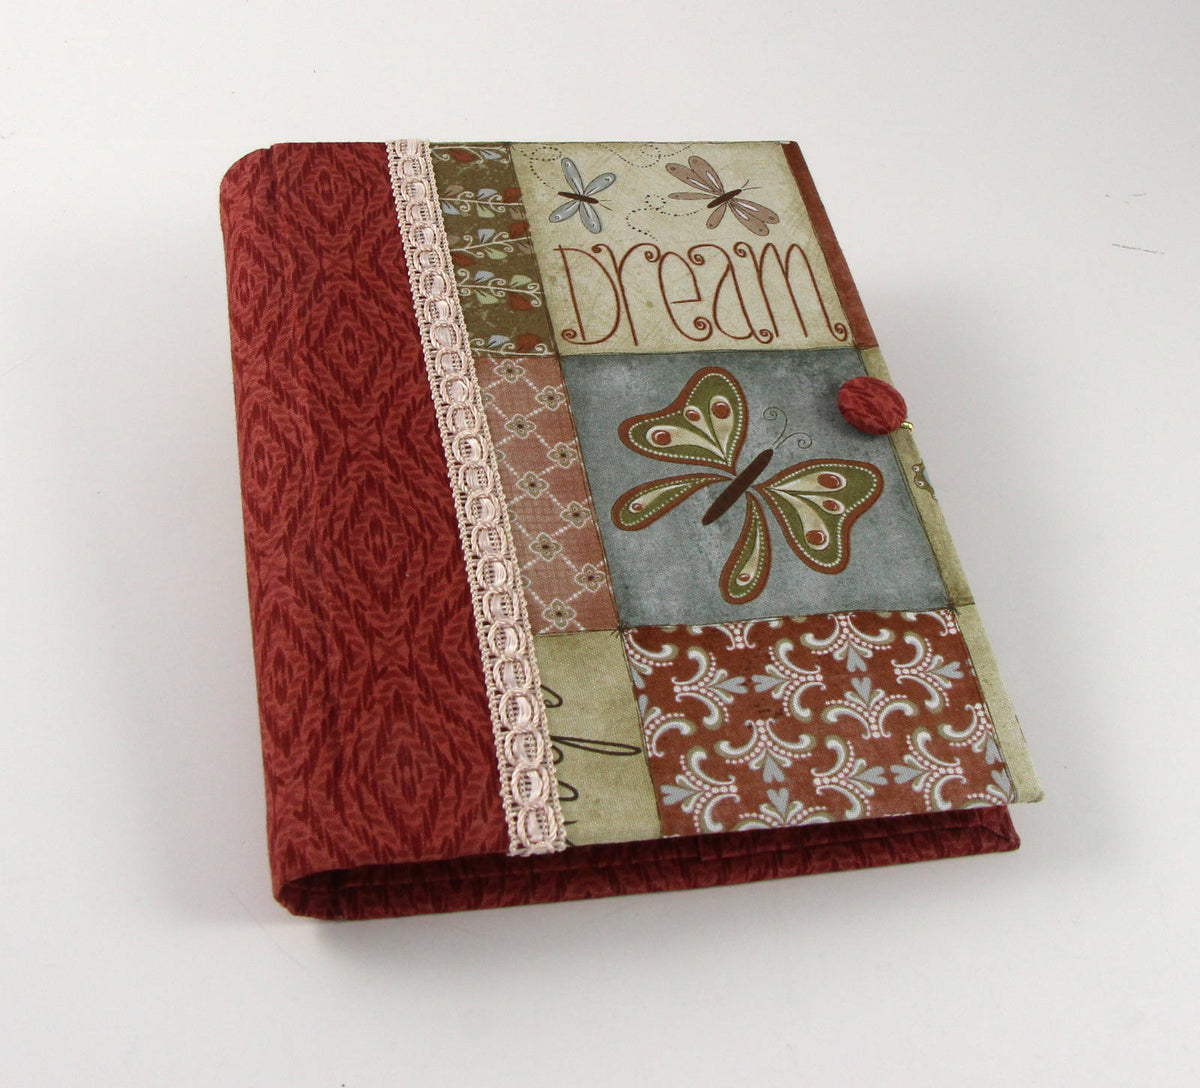 Reusable fabric journal cover  DIY kit, cartonnage kit 101, online instructions included - Colorway Arts